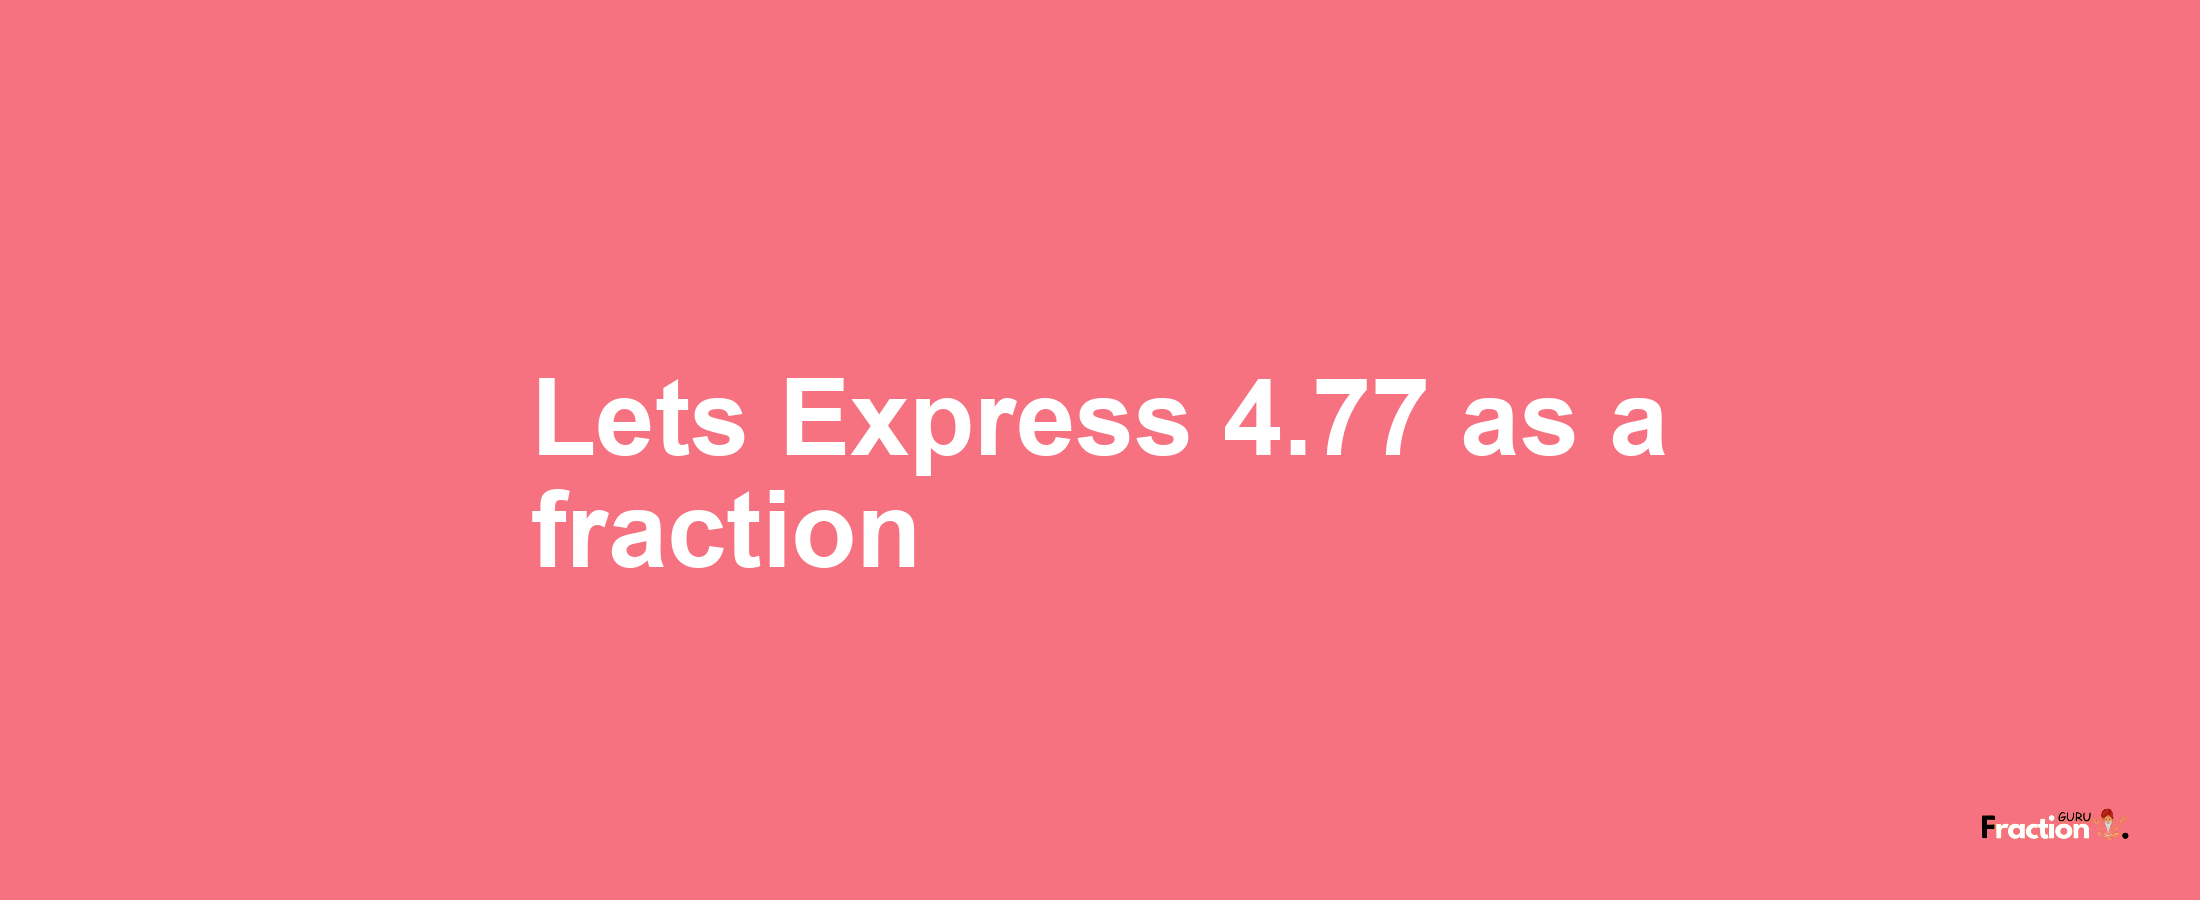 Lets Express 4.77 as afraction